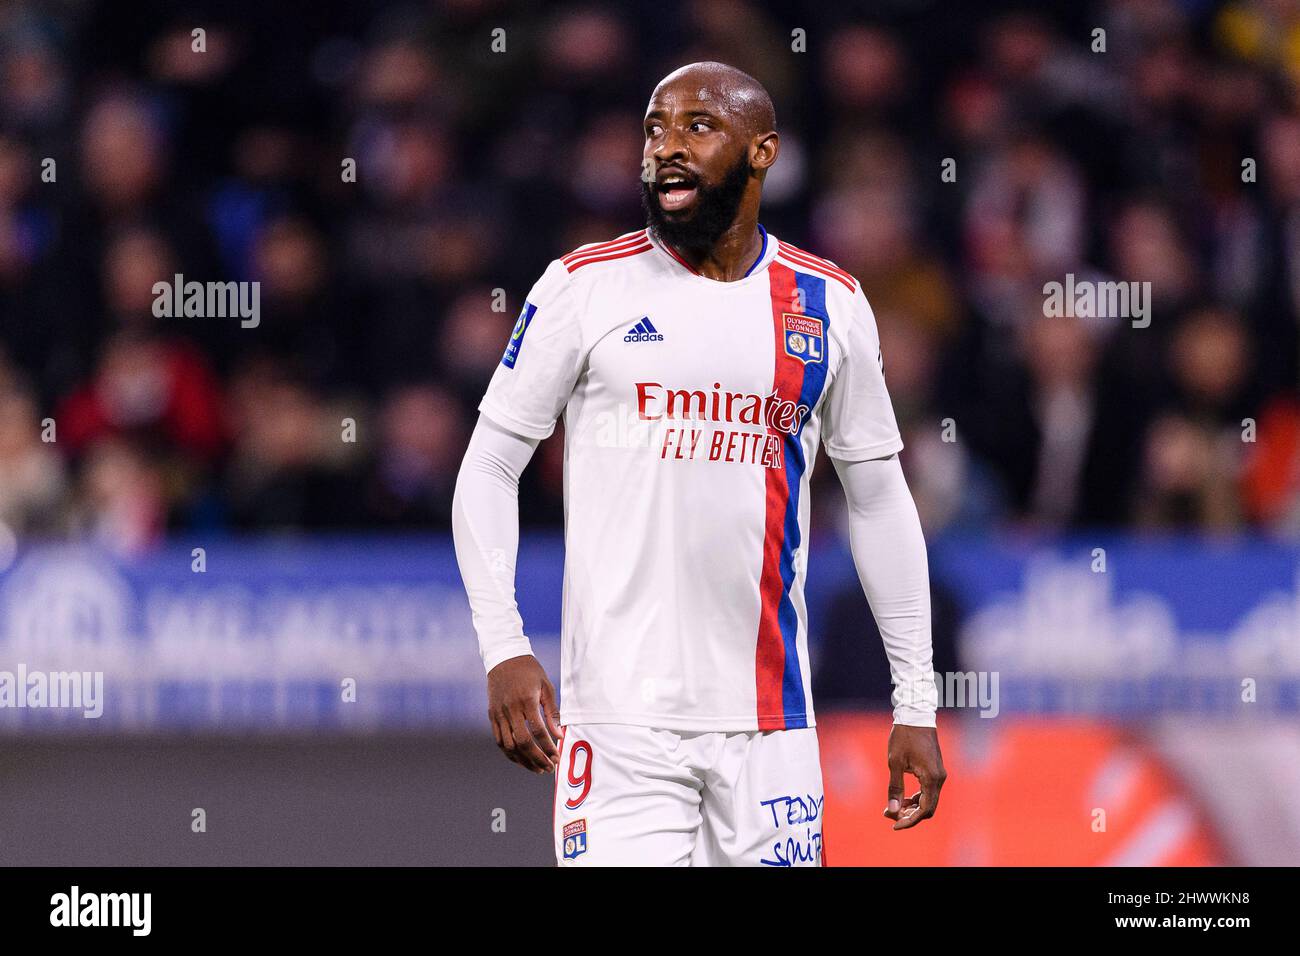 Lyon, France - February 27: Moussa Dembele of Lyon walks in the field during the Ligue 1 Uber Eats match between Olympique Lyonnais and Lille OSC at G Stock Photo